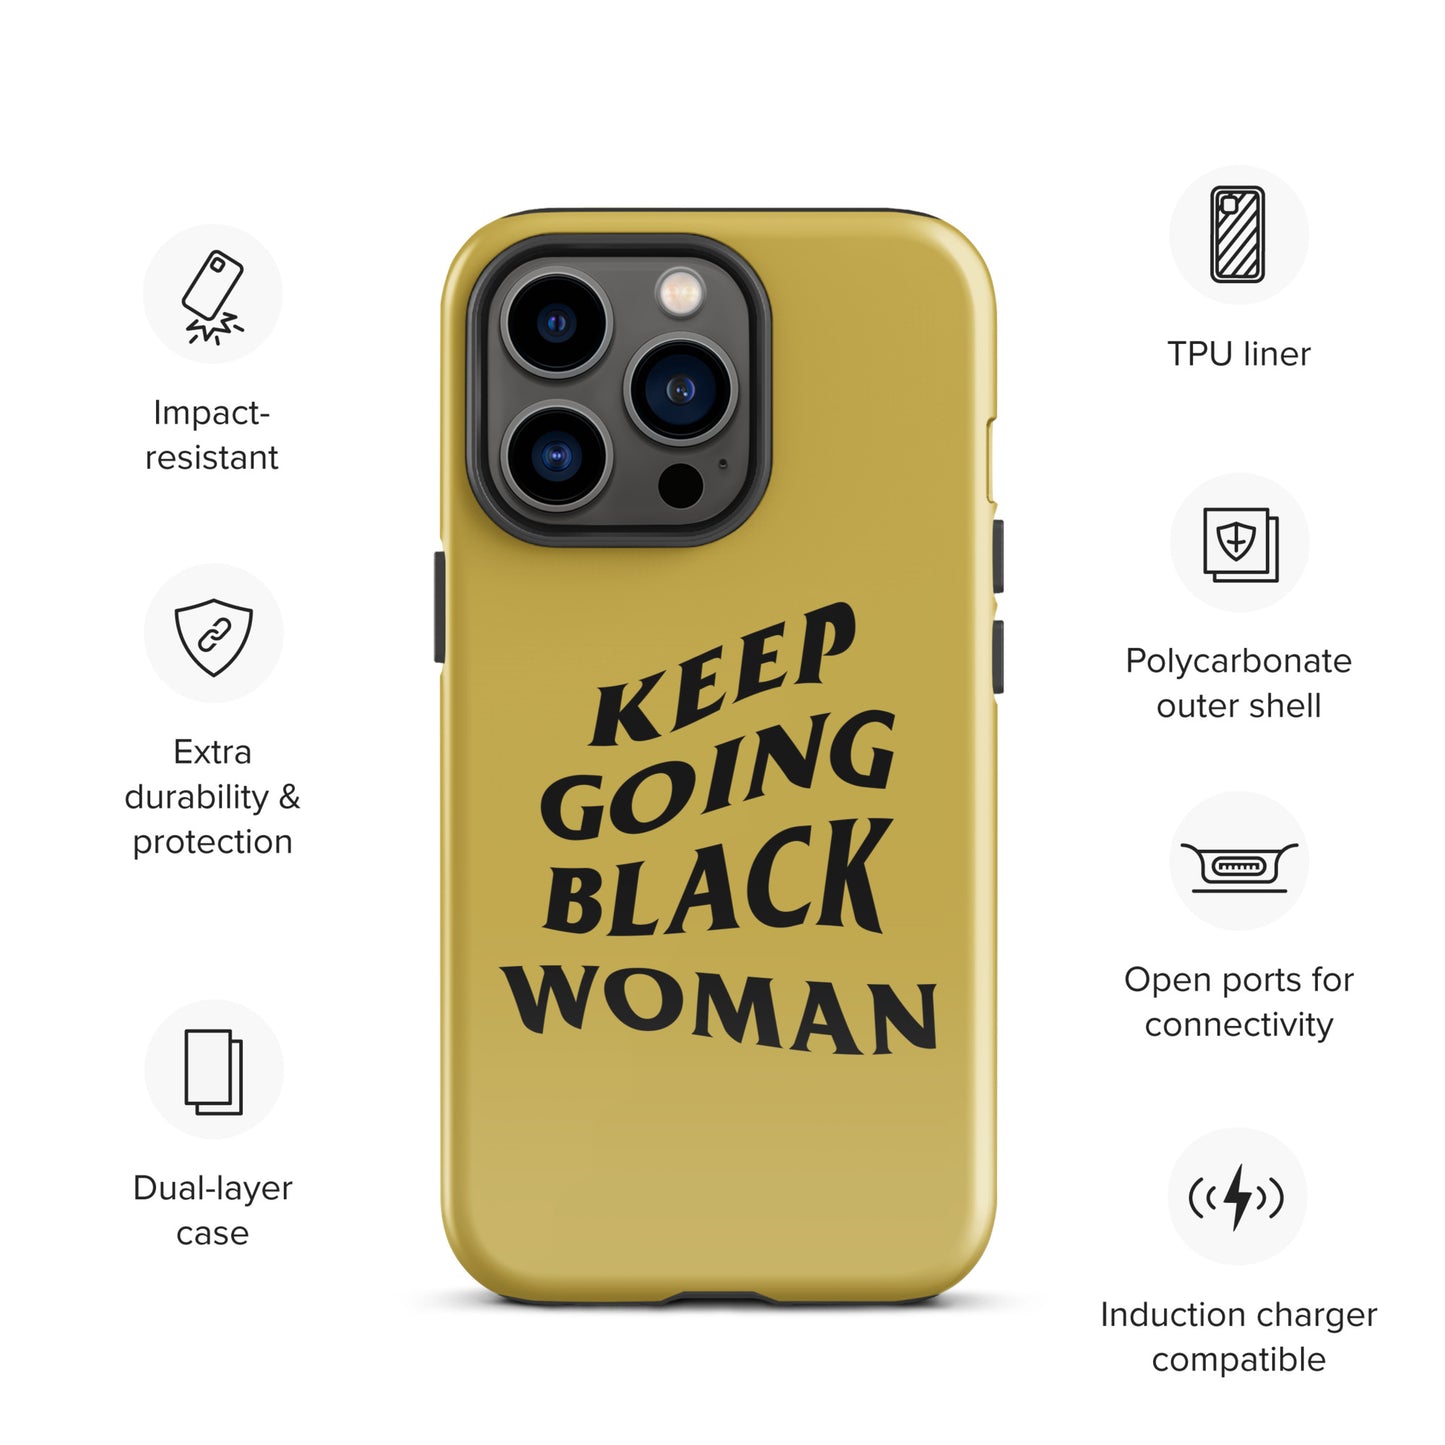 Keep Going Black Woman Tough Case for iPhone® (Gold)